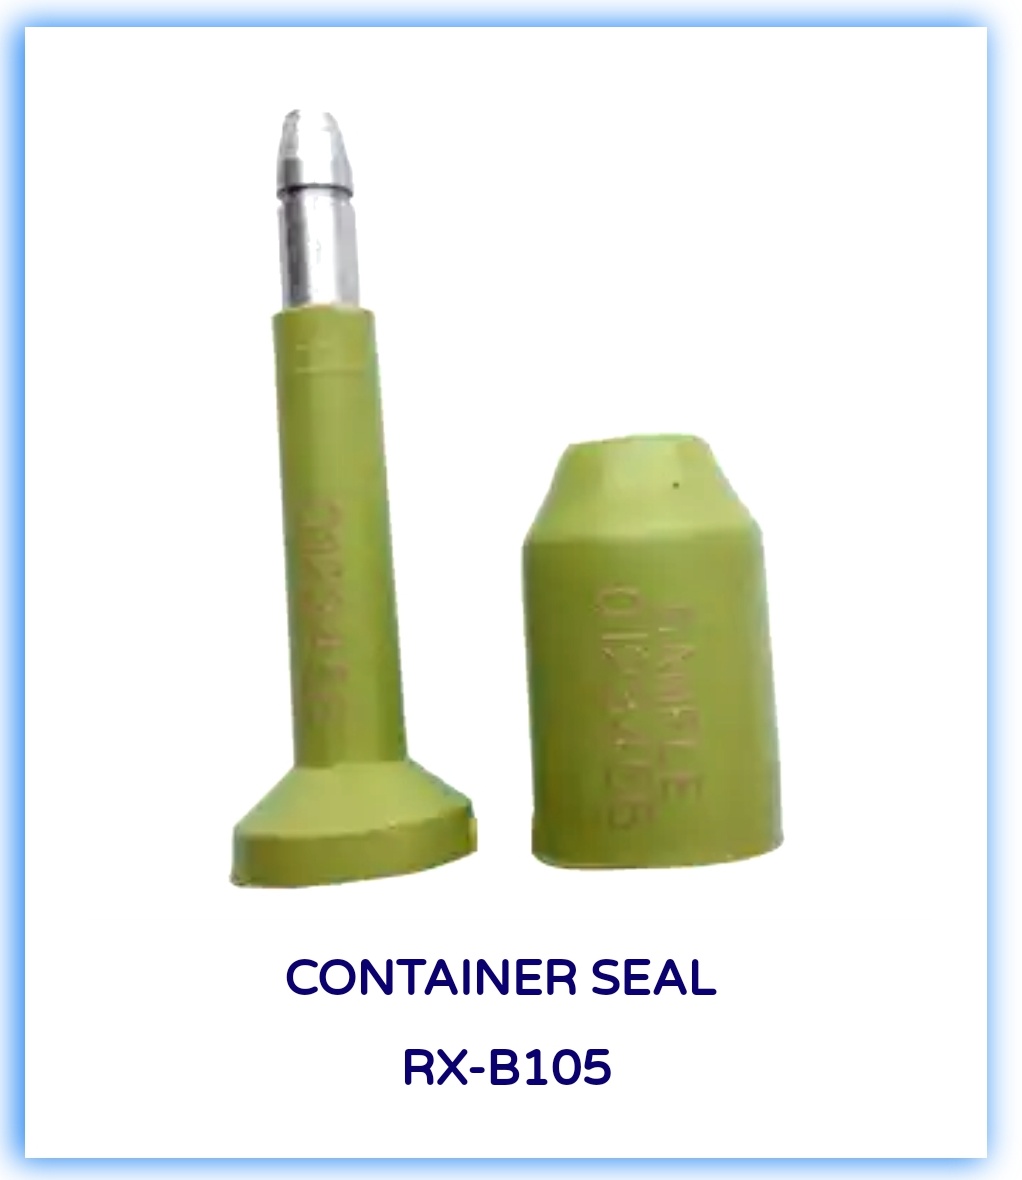 Container Bolt Security Seals at Best Price in India